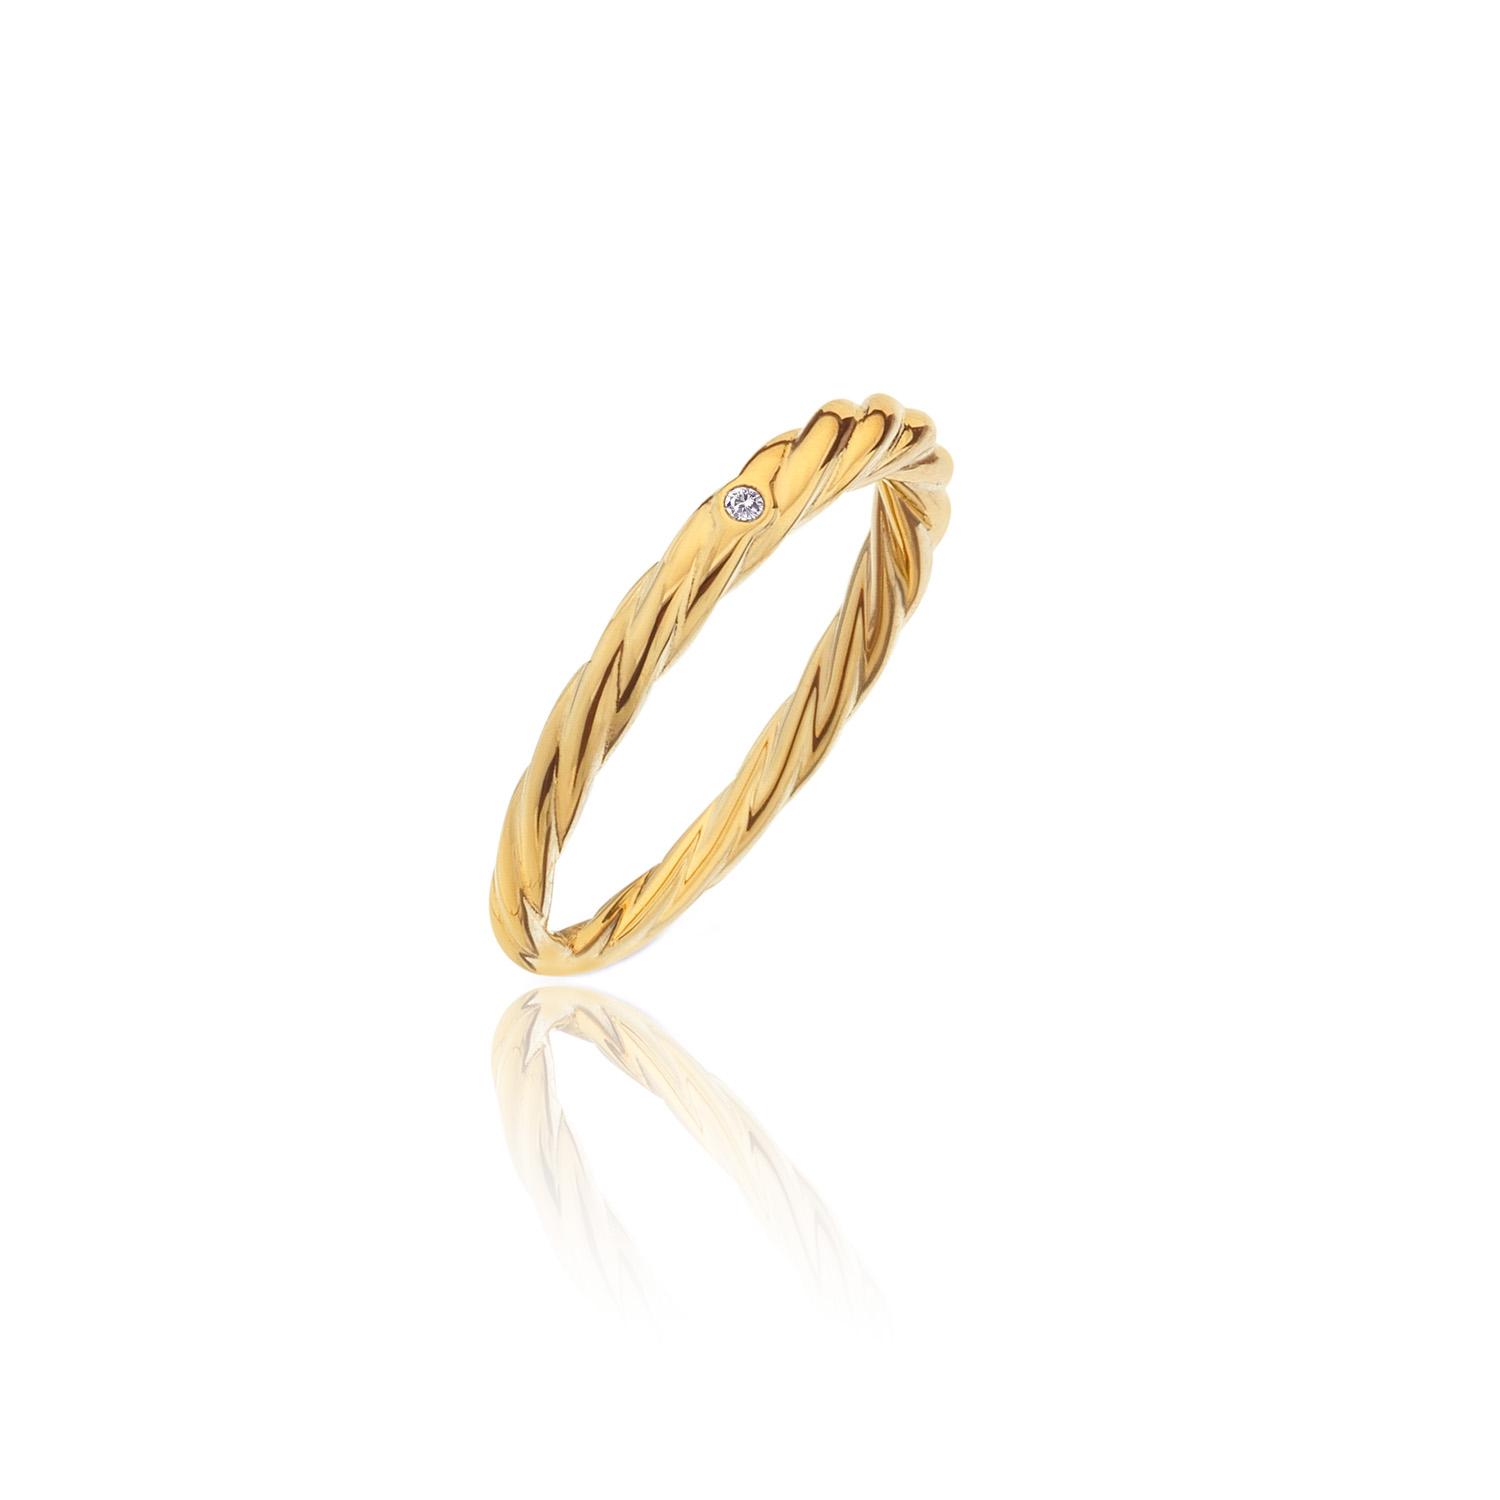 Hot Diamonds X JJ 18ct Gold Plated Entwine Band Ring